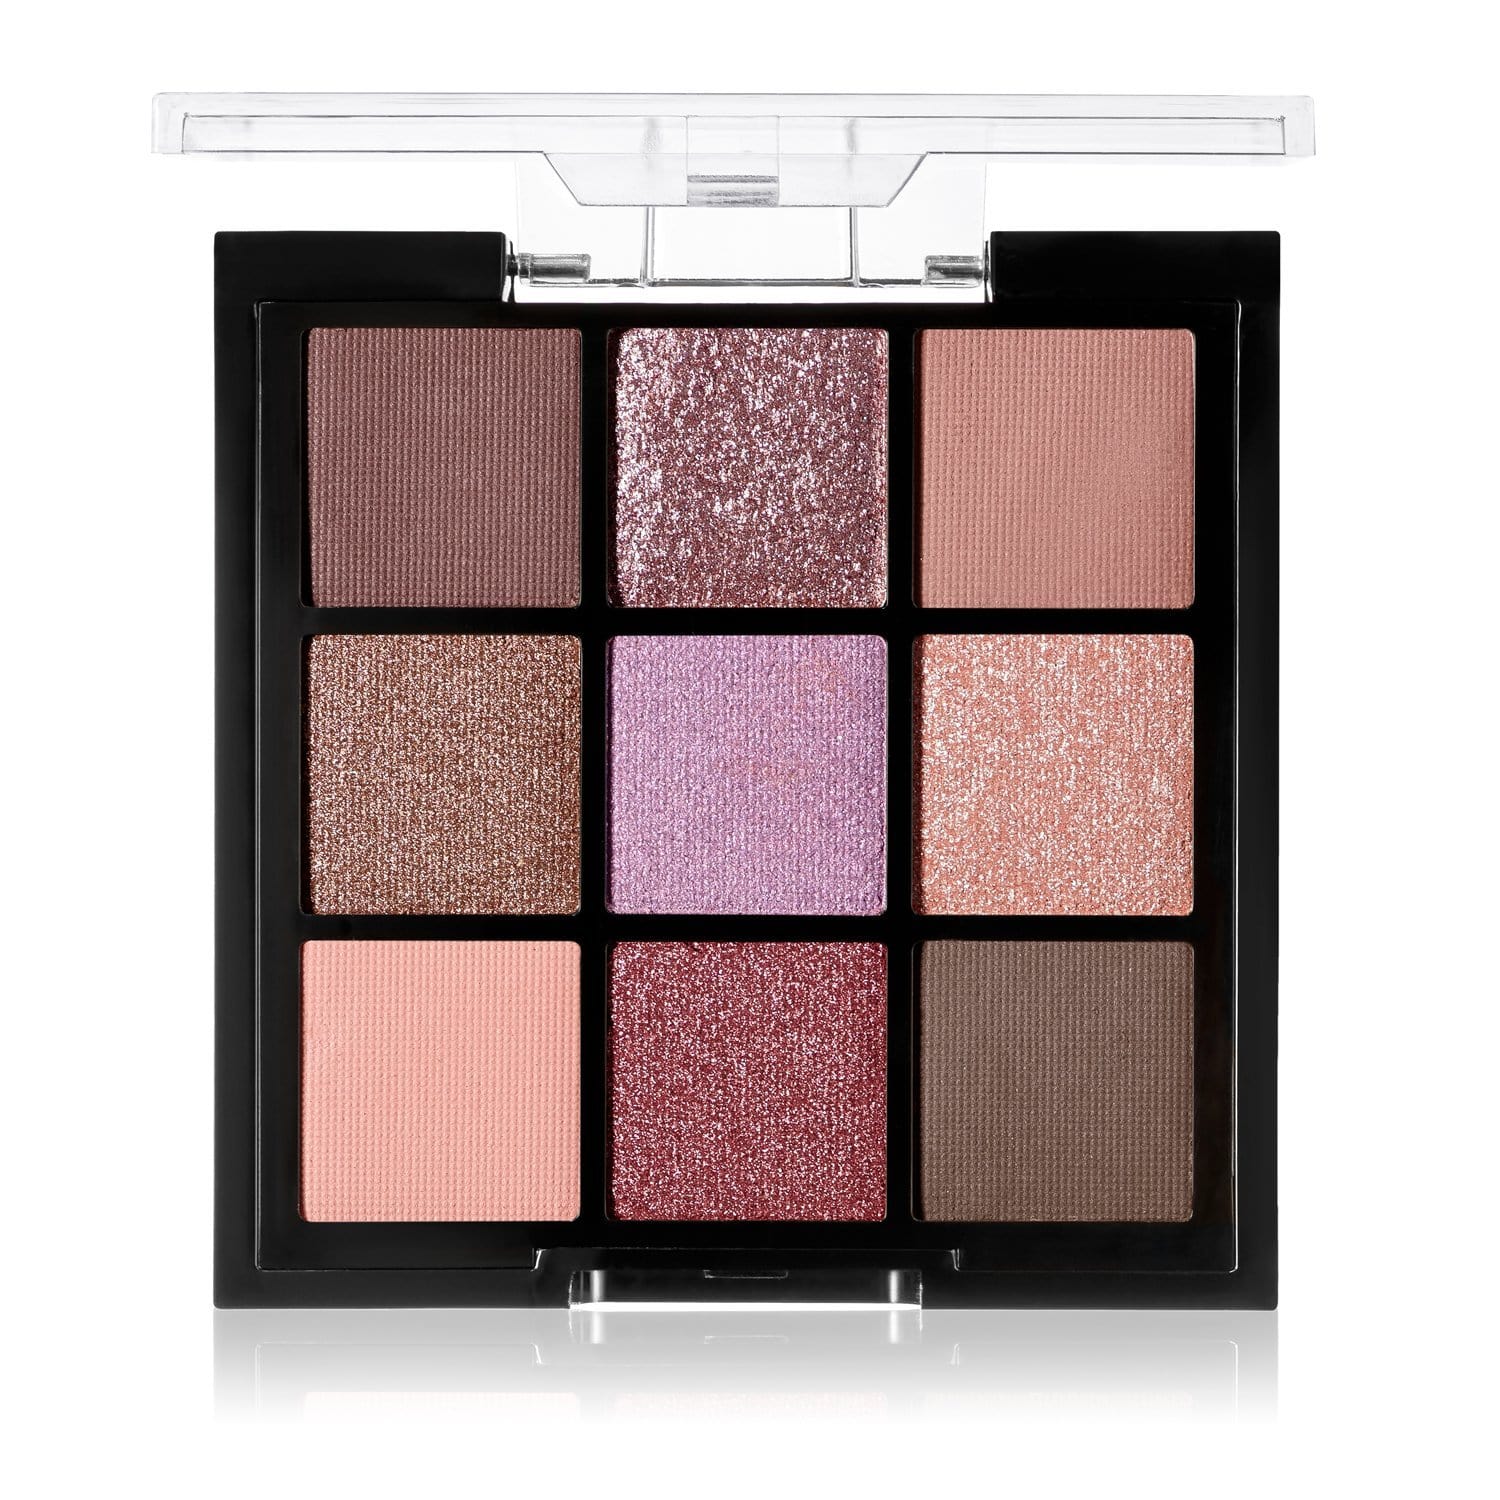 lottie palette - the mauves Makeup 9 shade eyeshadow palette